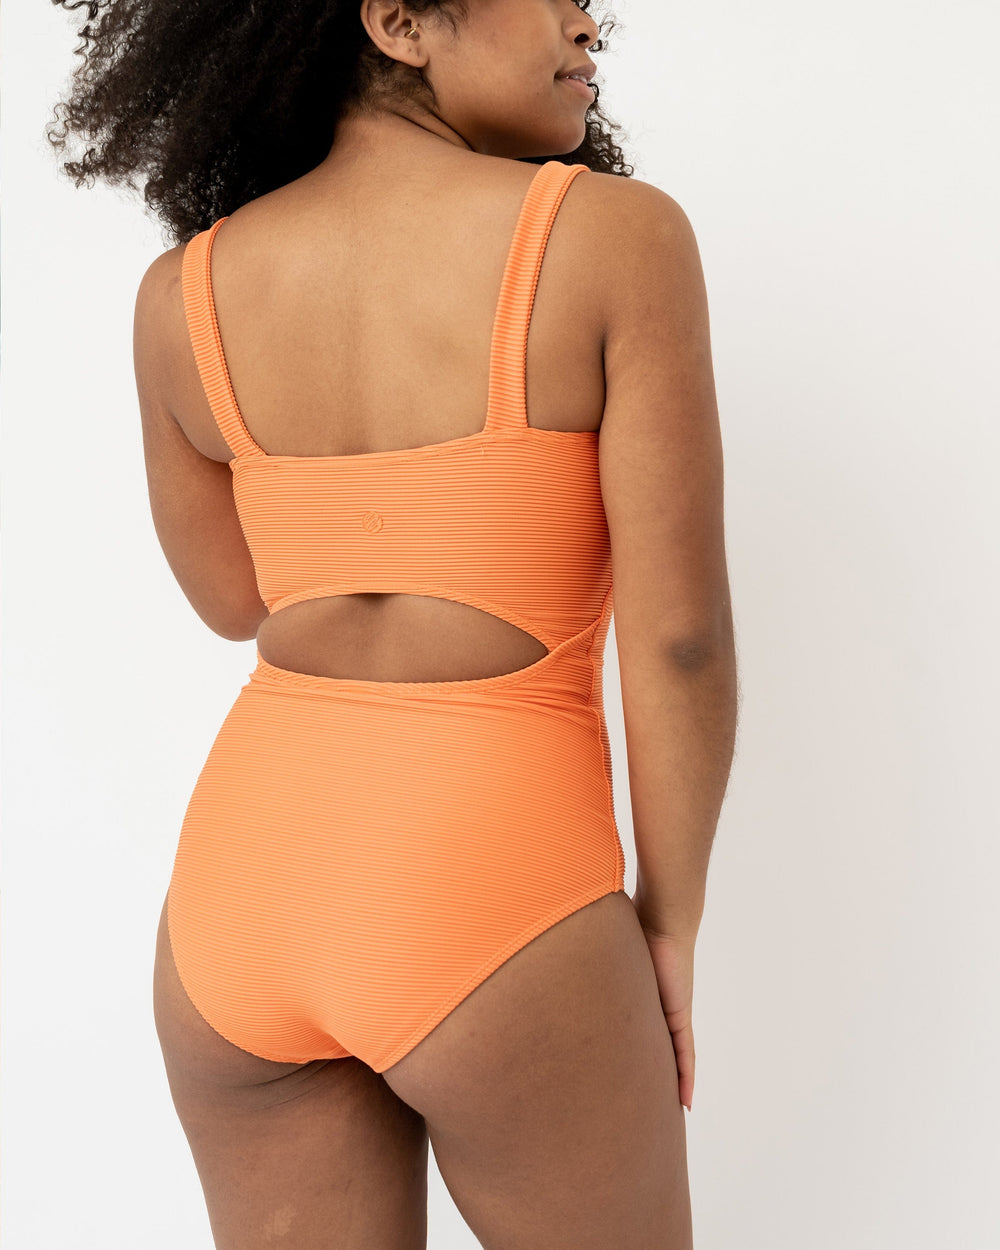 Back View Studio picture of a girl wearing a textured orange one piece swimsuit